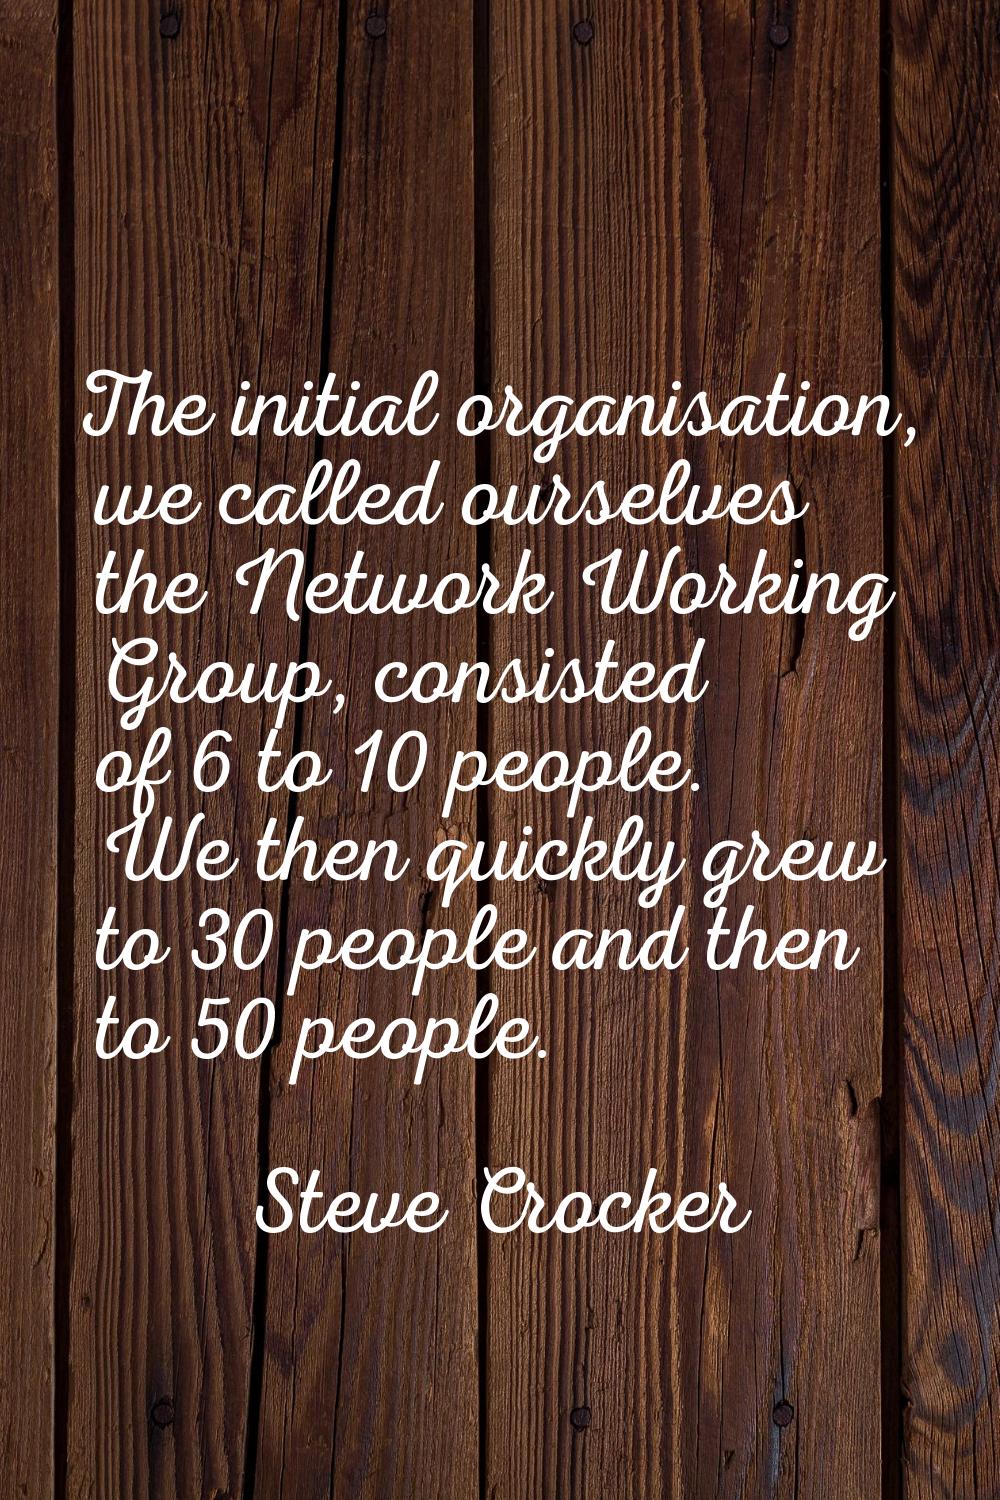 The initial organisation, we called ourselves the Network Working Group, consisted of 6 to 10 peopl